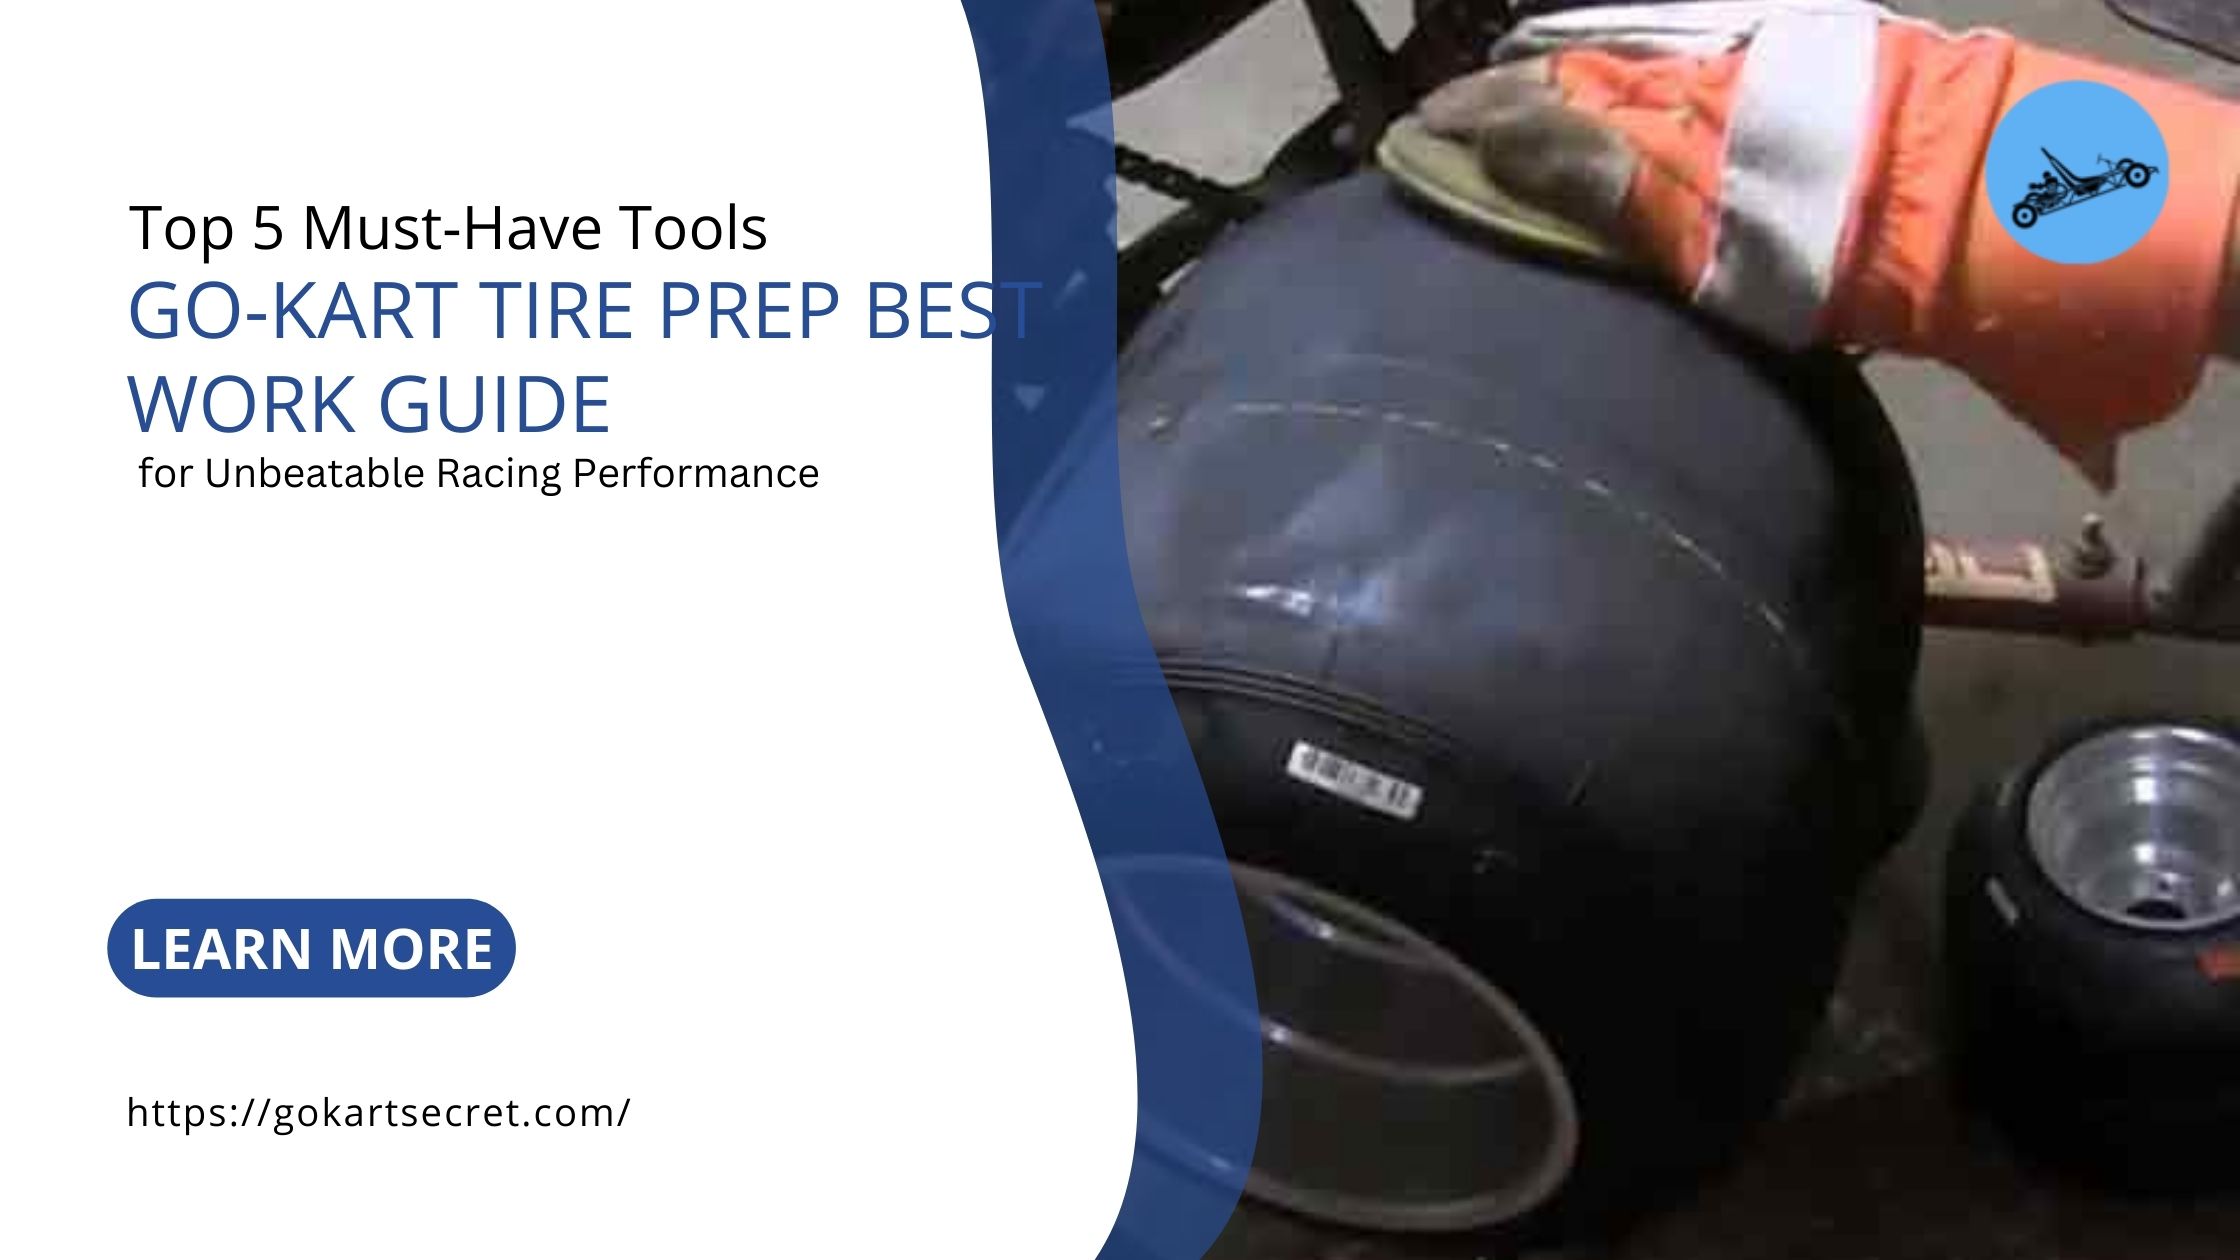 Go kart tire prep best work guide: Top 5 Must-Have Tools for Unbeatable Racing Performance